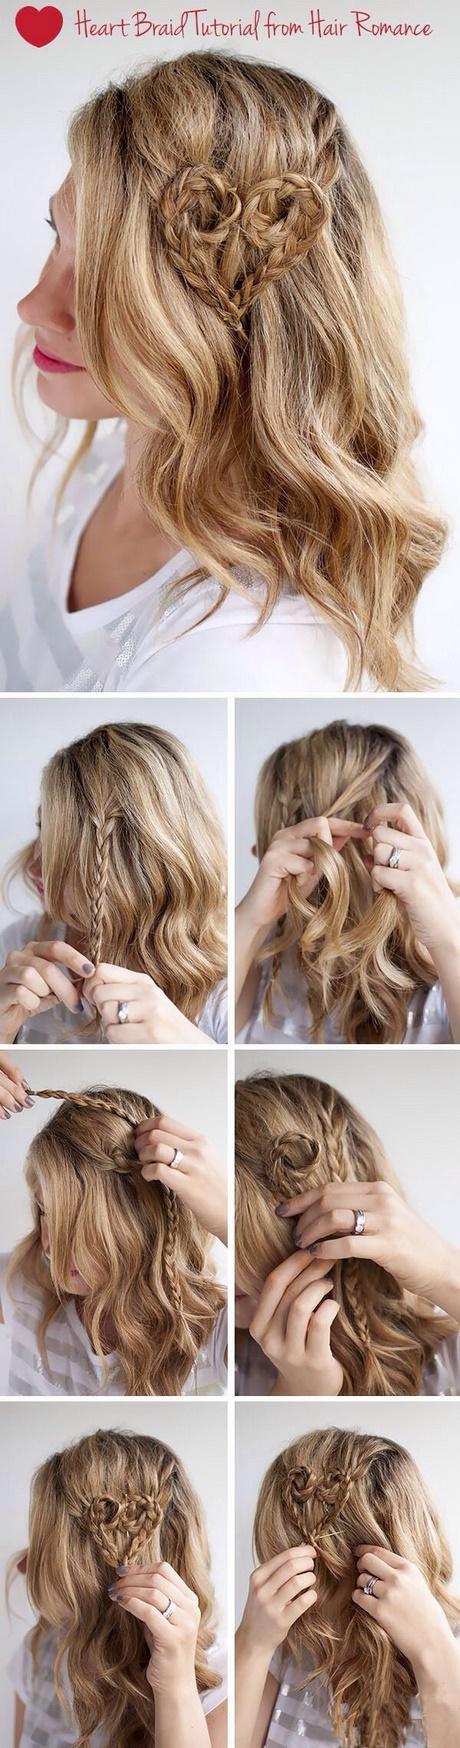 Very easy hairstyles